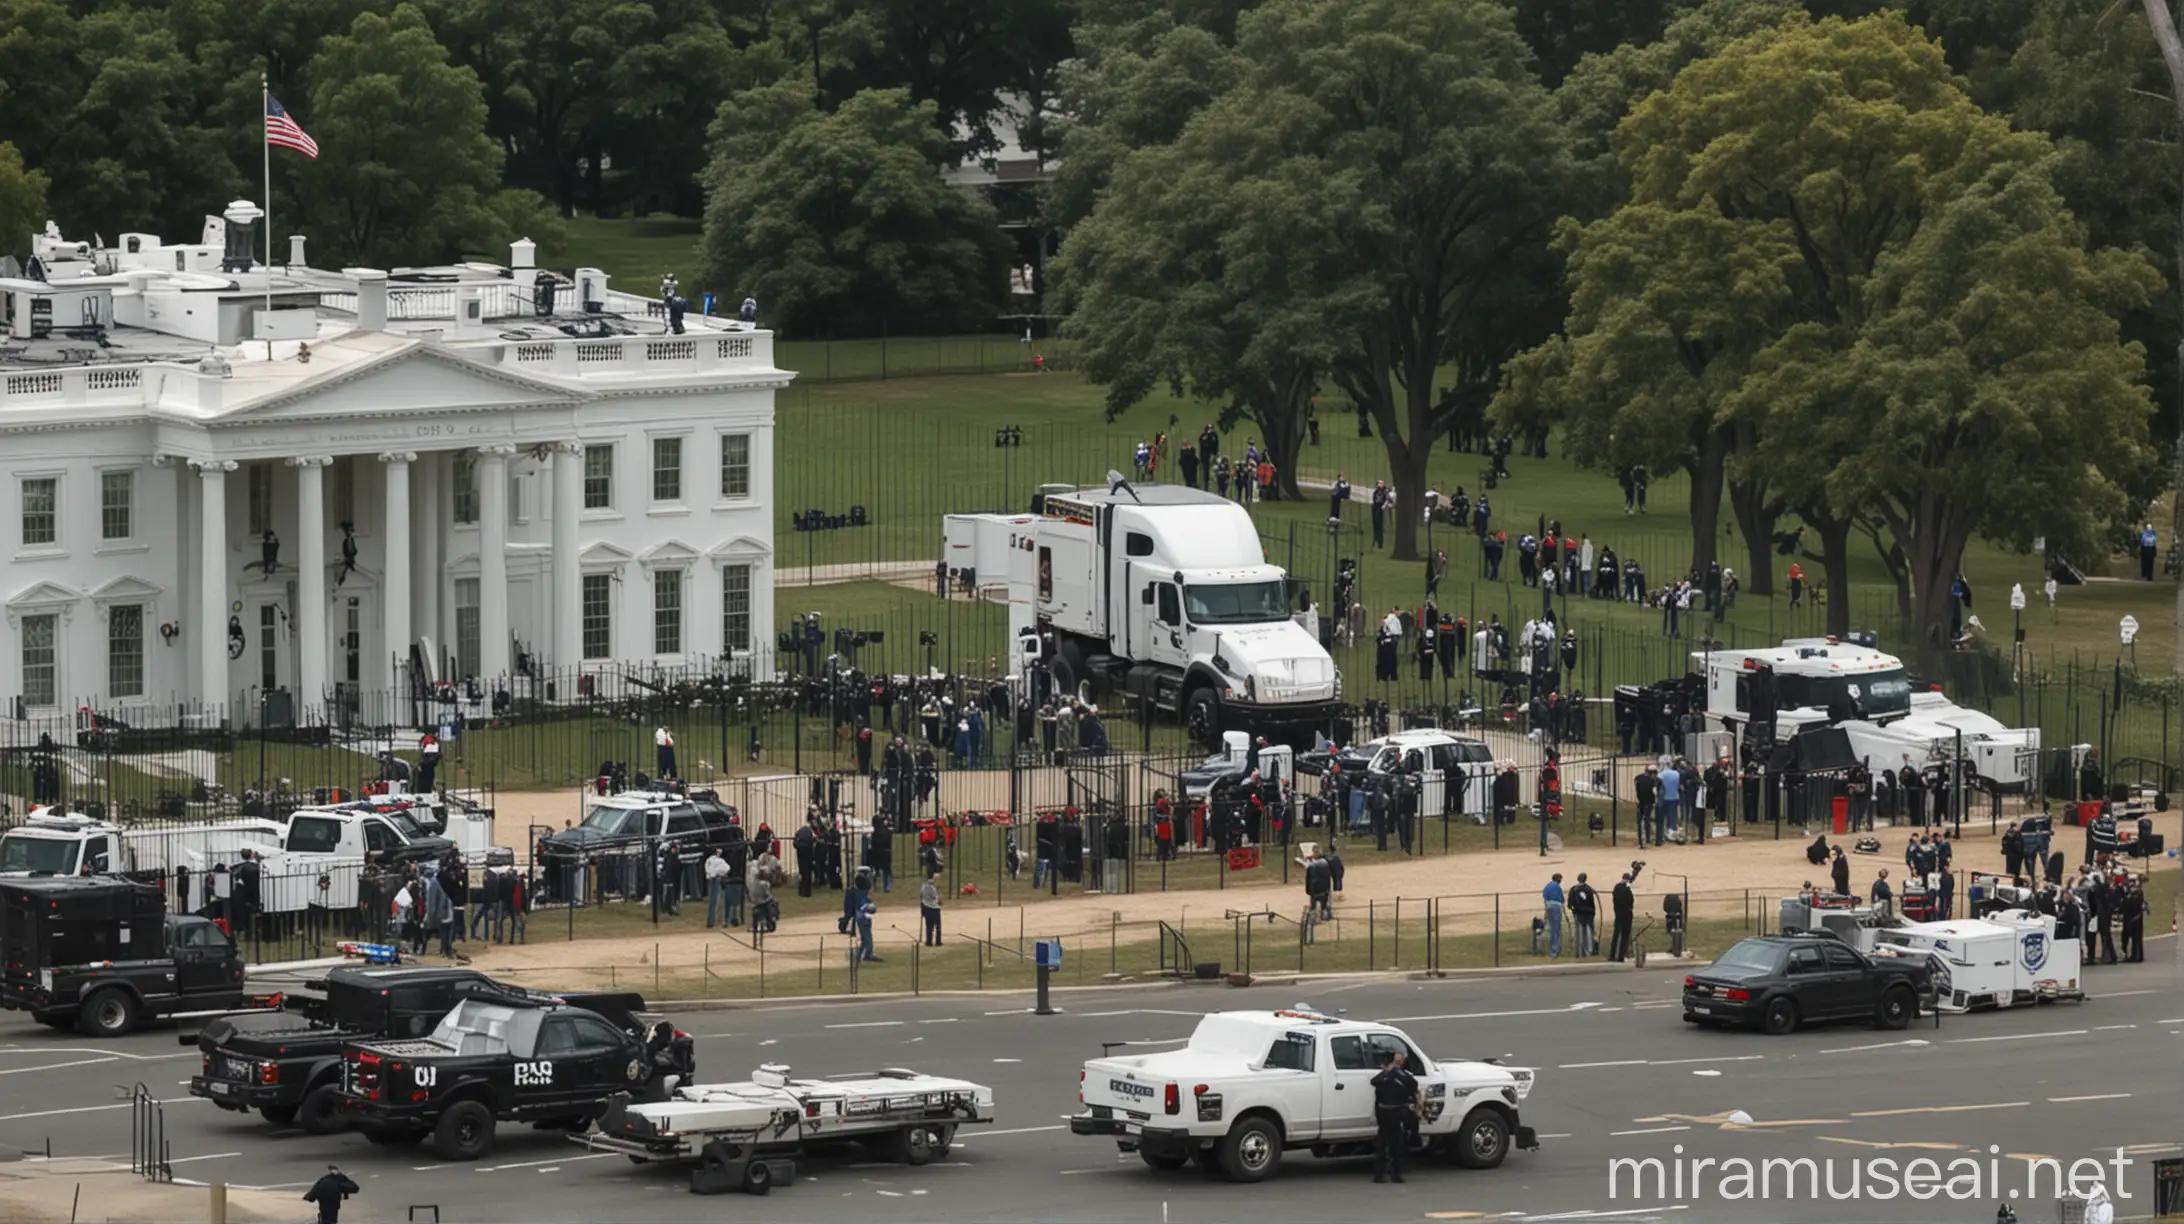 Police Arresting Man near White House with Parked Truck